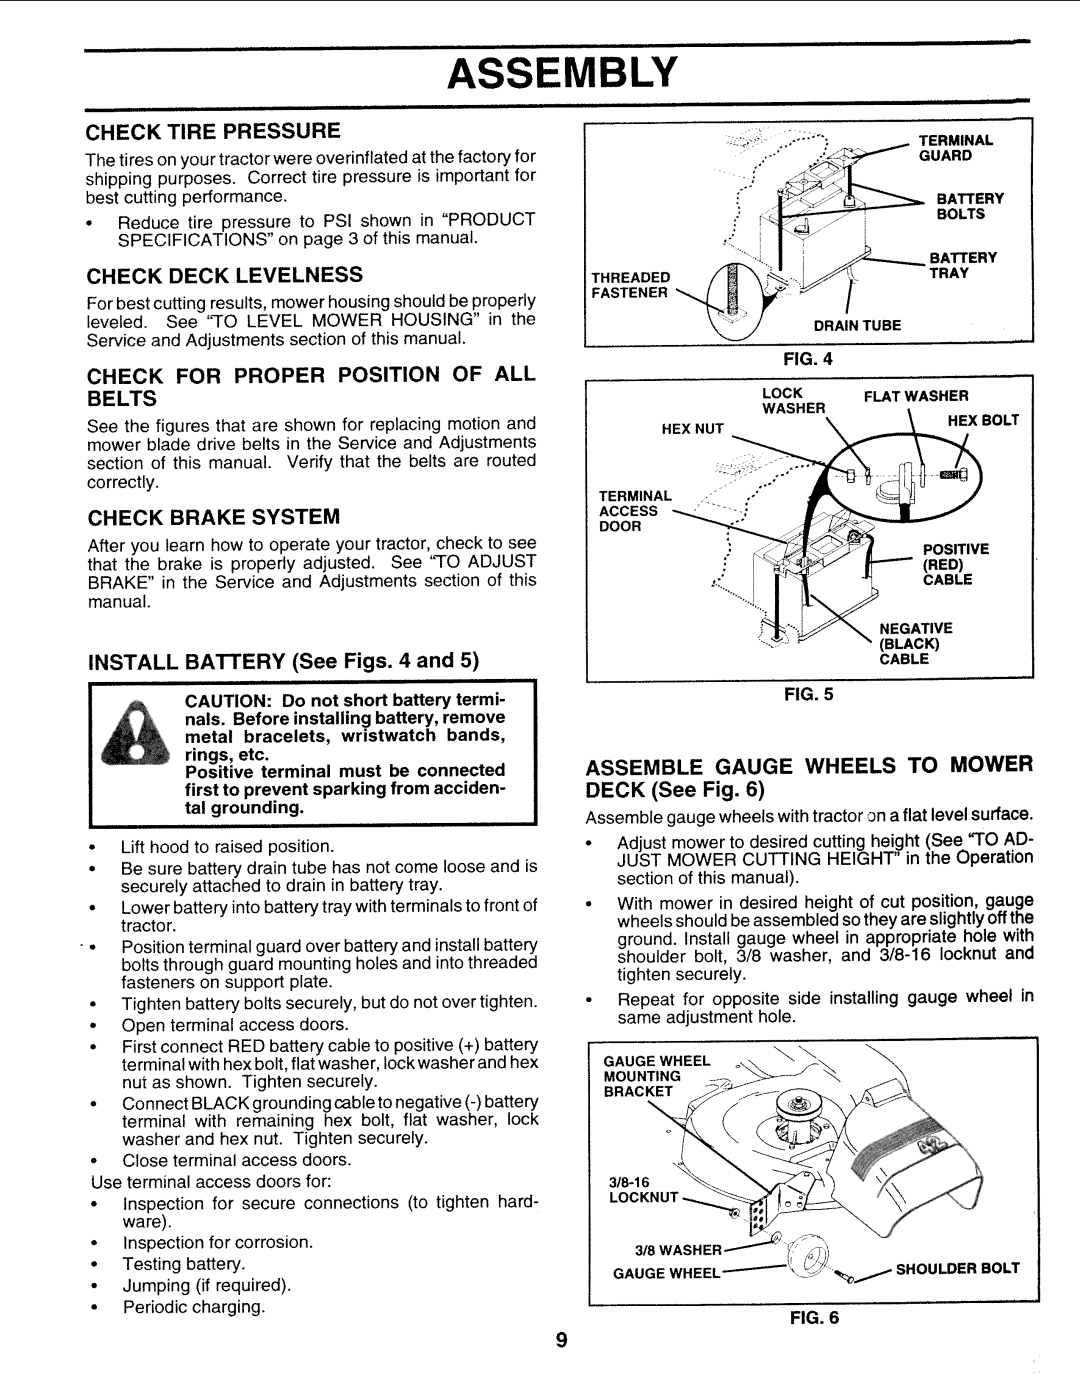 Sears 917.25271 Assembly, Check Tire Pressure, Check Deck Levelness, Check For Proper Position Of All Belts, Bolts, Fig 